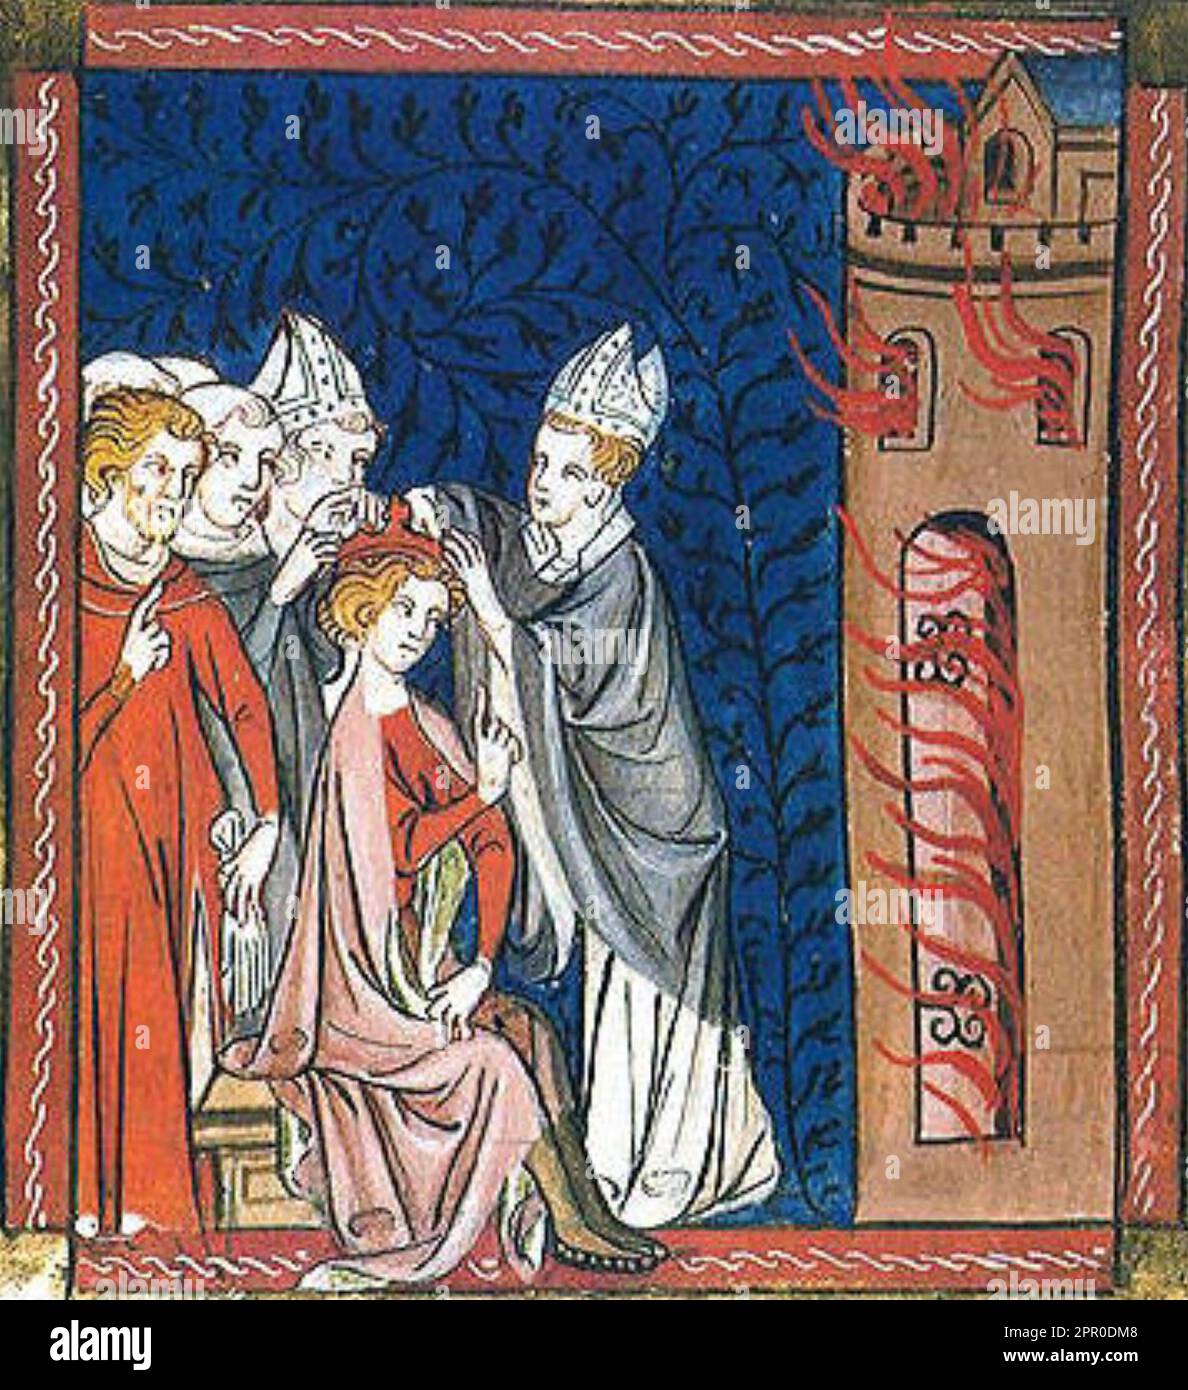 CORONATION OF RICHARD I OF ENGLAND IN 1189. Source: British Library Stock Photo